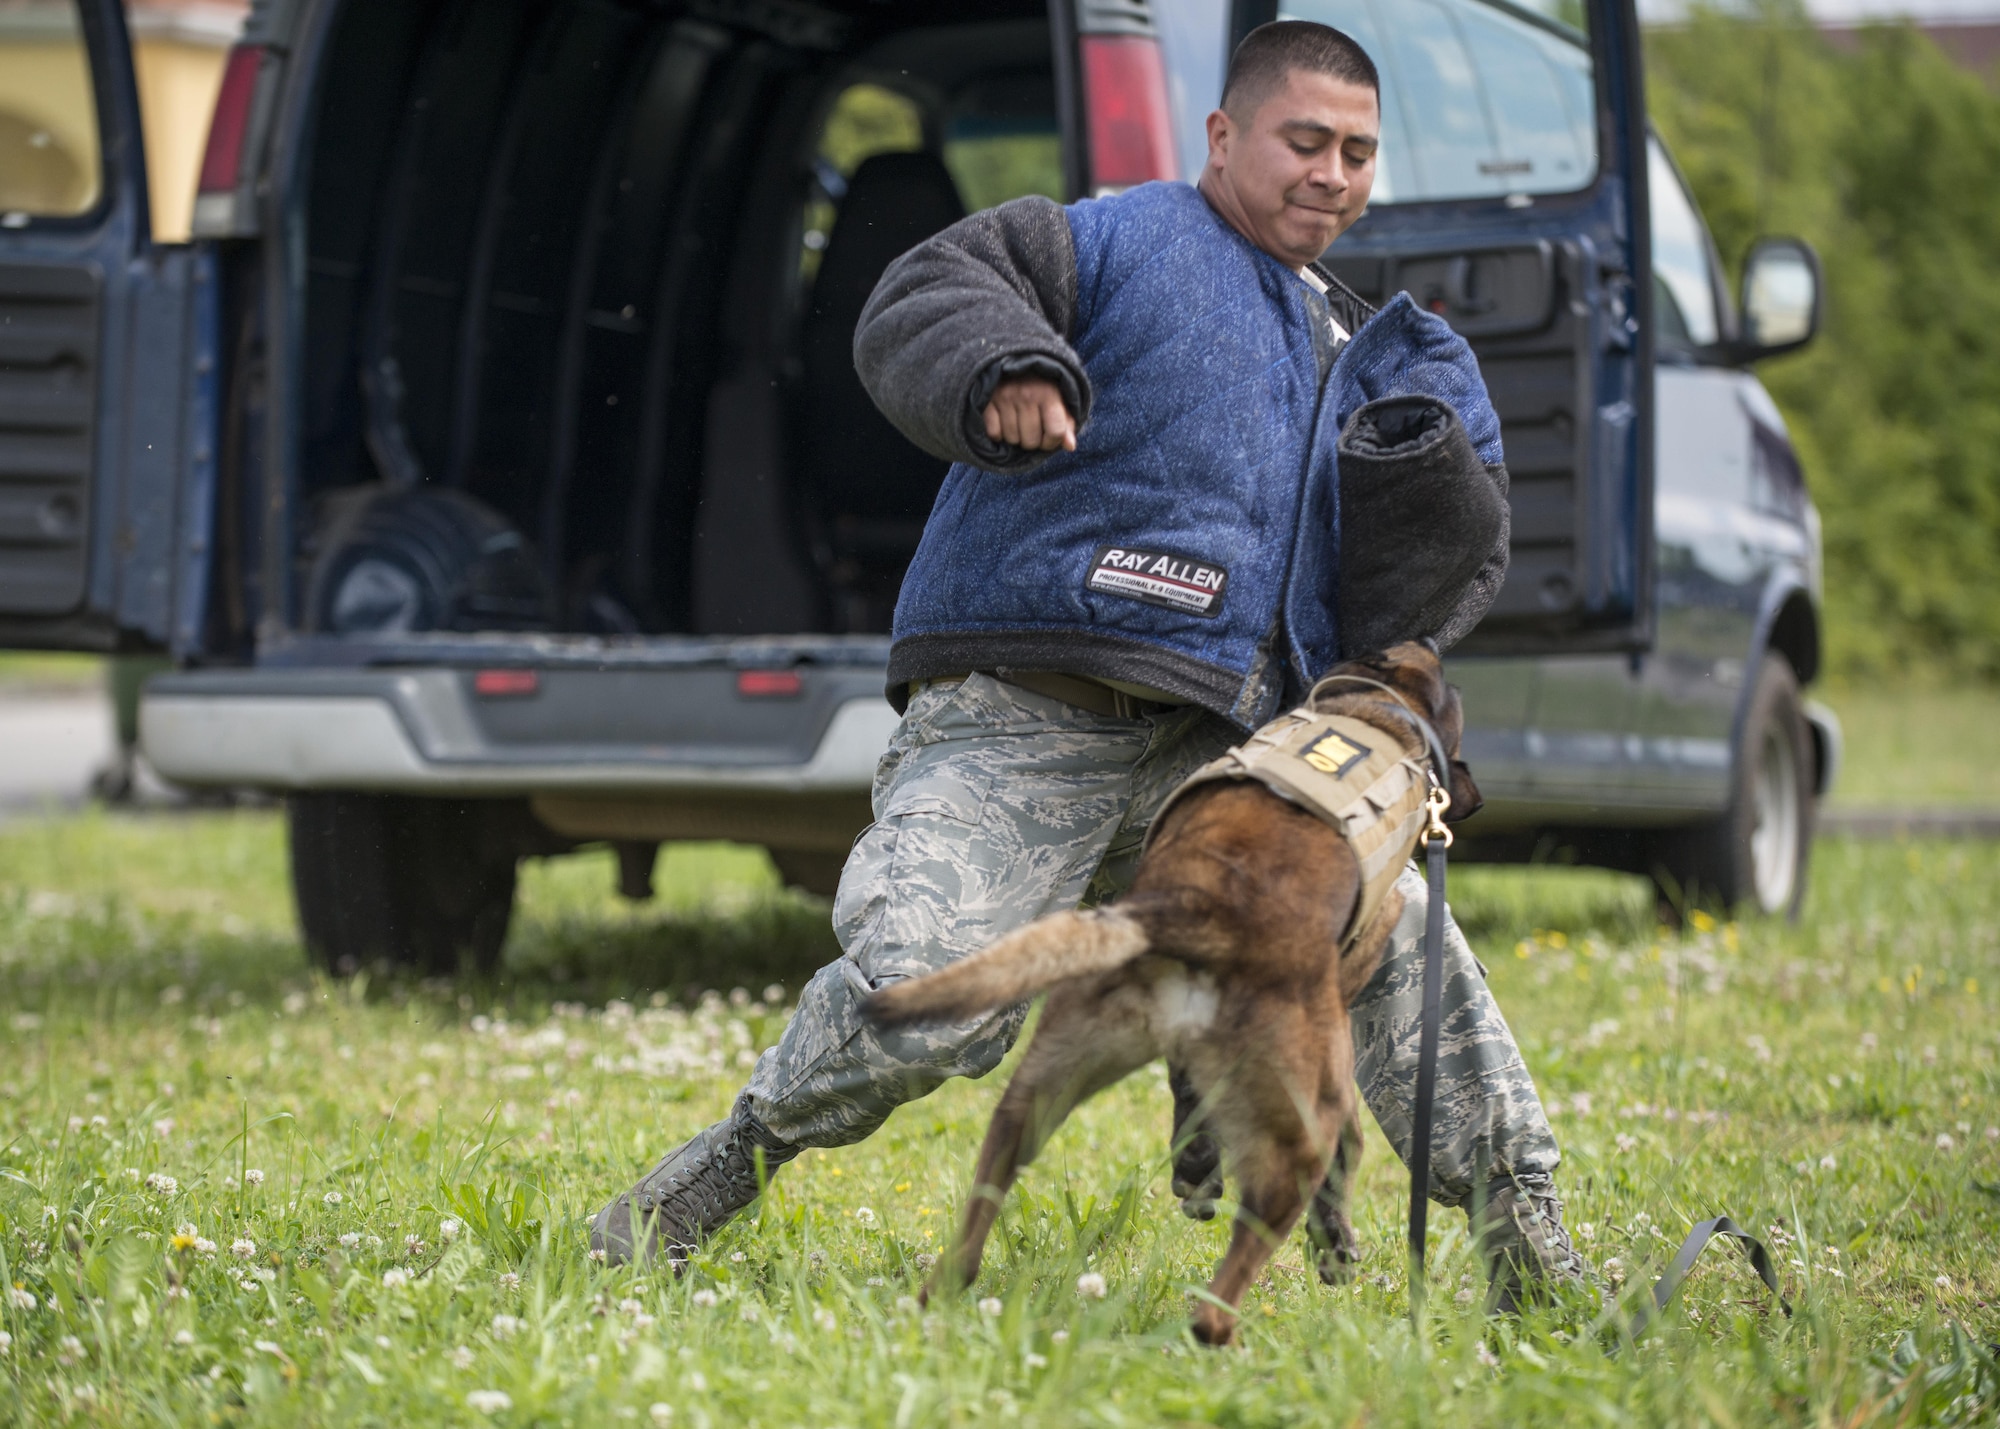 Staff Sgt. Jose Lizardo, 31st Security Force Squadron military working dog handler, and Rocky, 31st SFS MWD, apprehend a suspect during a MWD demonstration during National Police Week May 16, 2016, at Aviano Air Base, Italy. The demo showcased the capabilities of MWDs and their handlers. (U.S. Air Force photo by Airman 1st Class Cory W. Bush/Released)